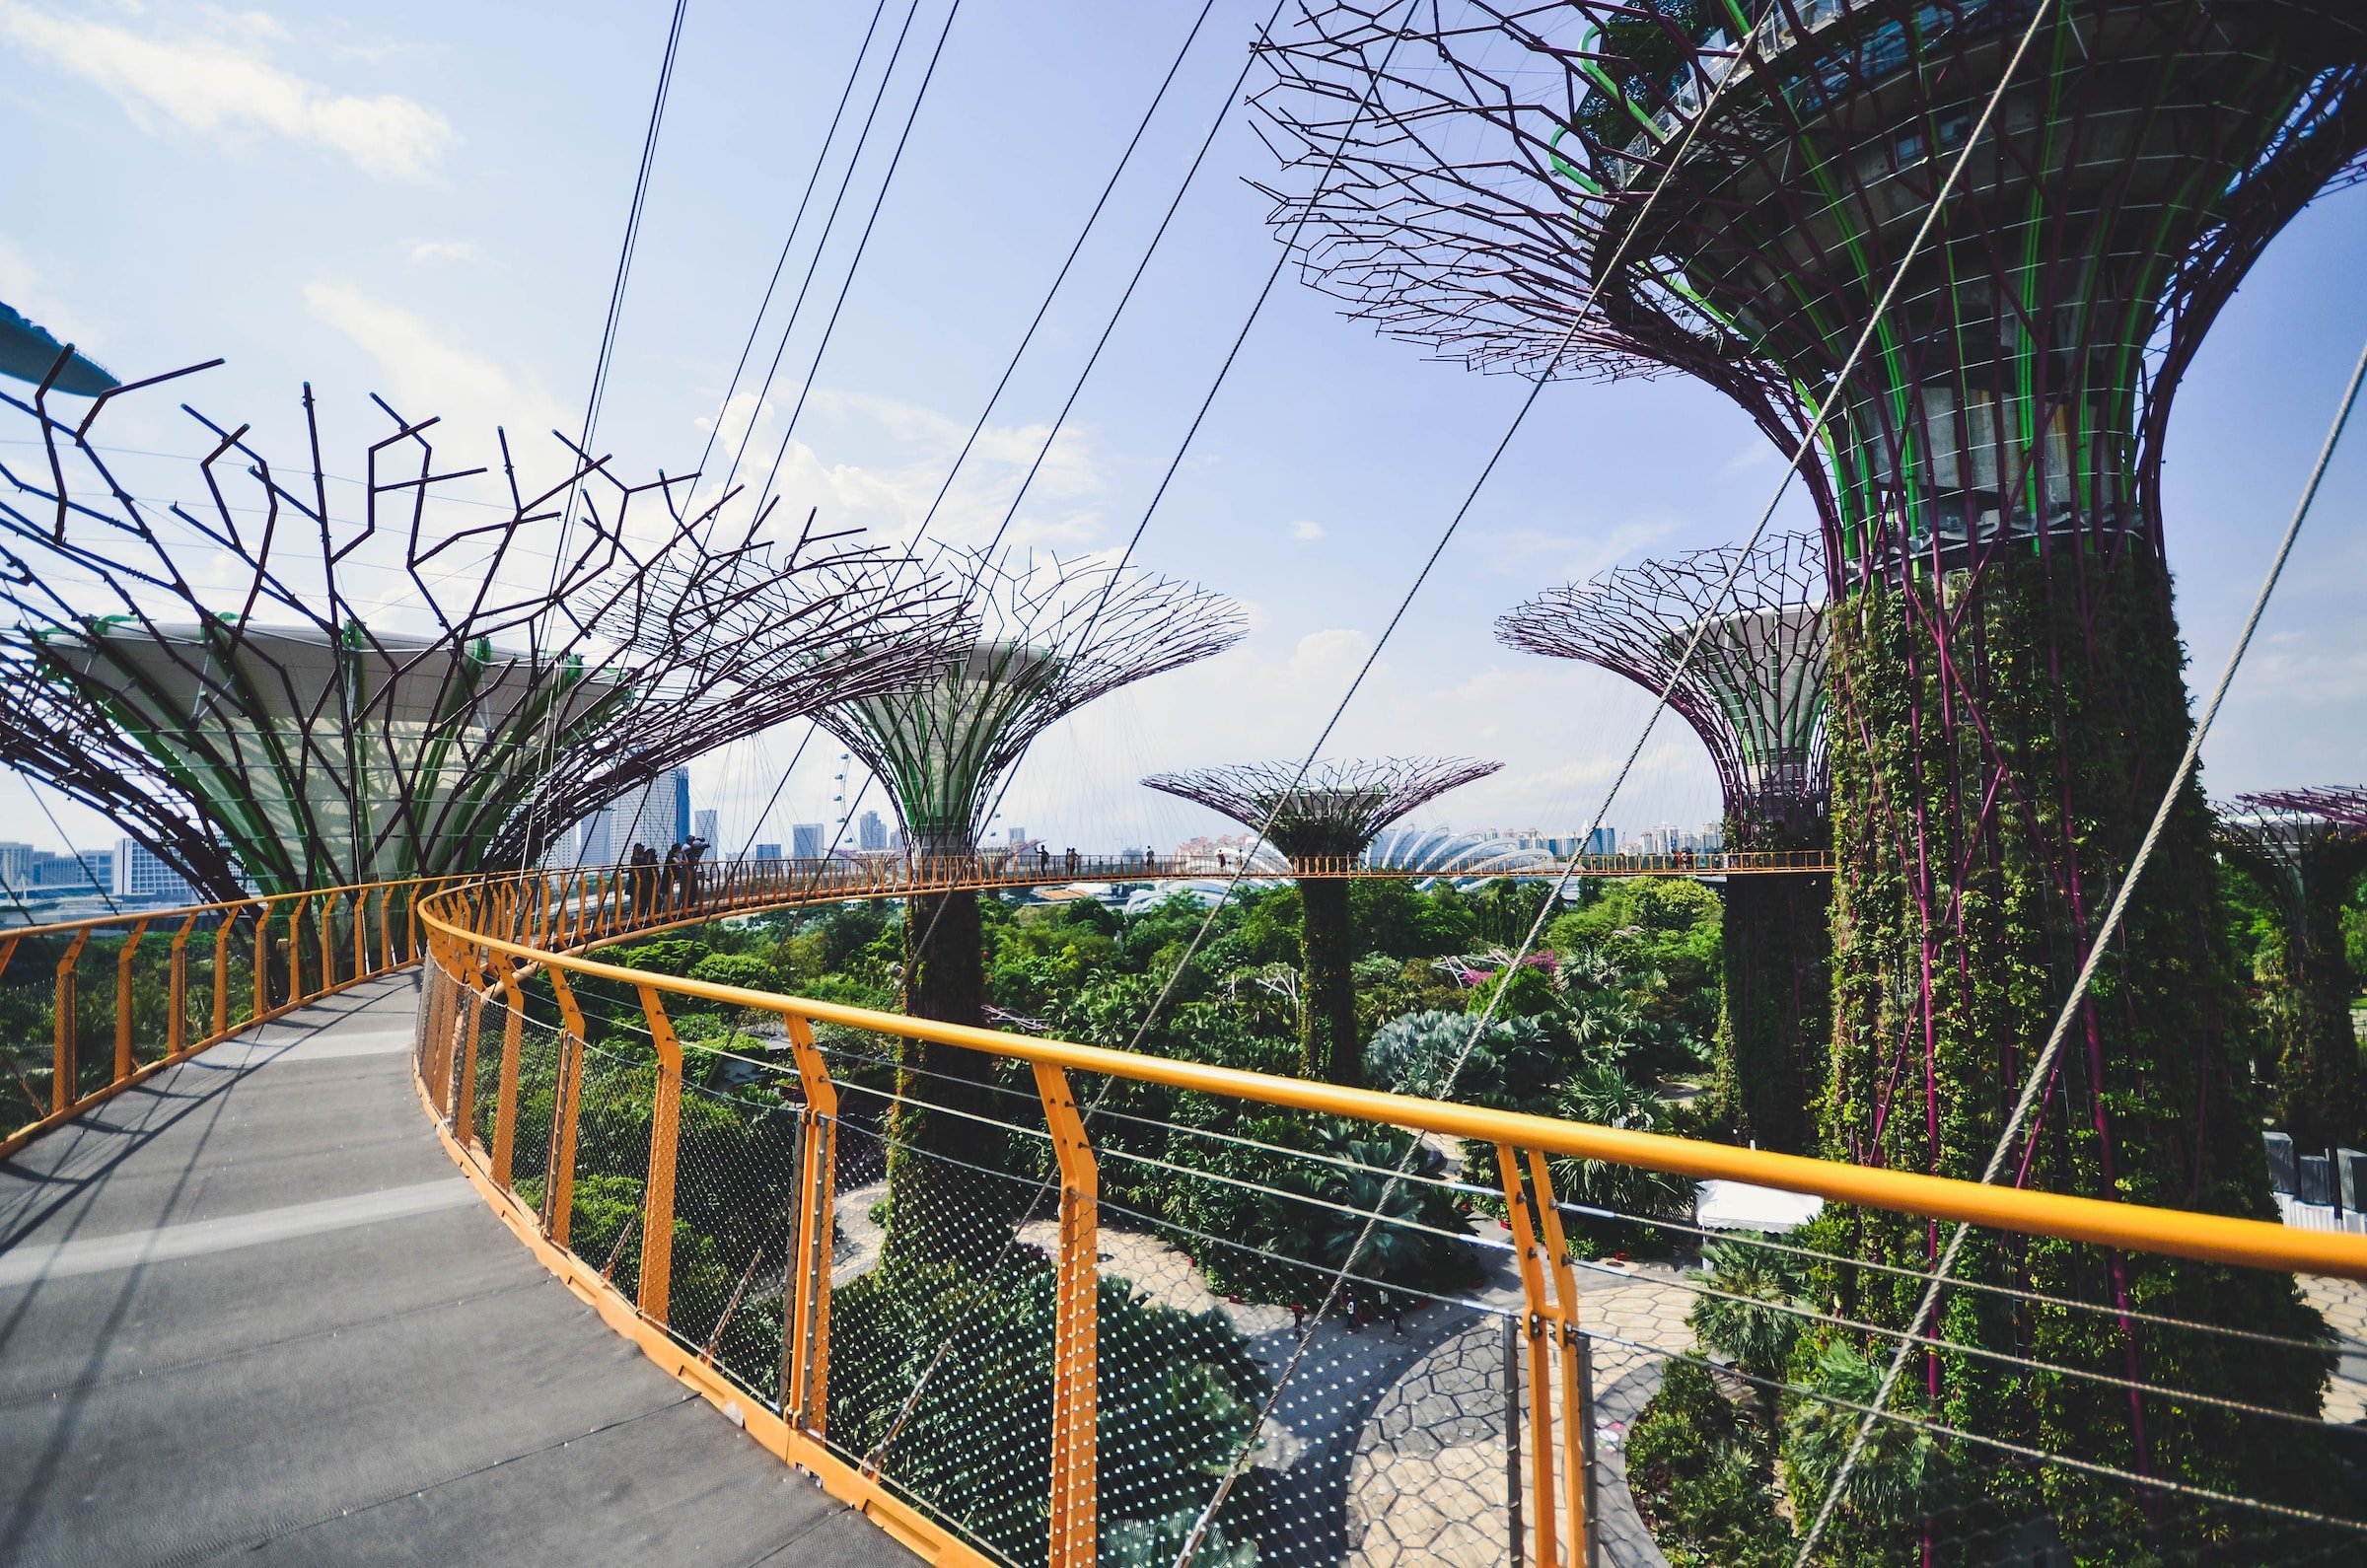 OCBC Skyway at Gardens by the Bay in Singapore